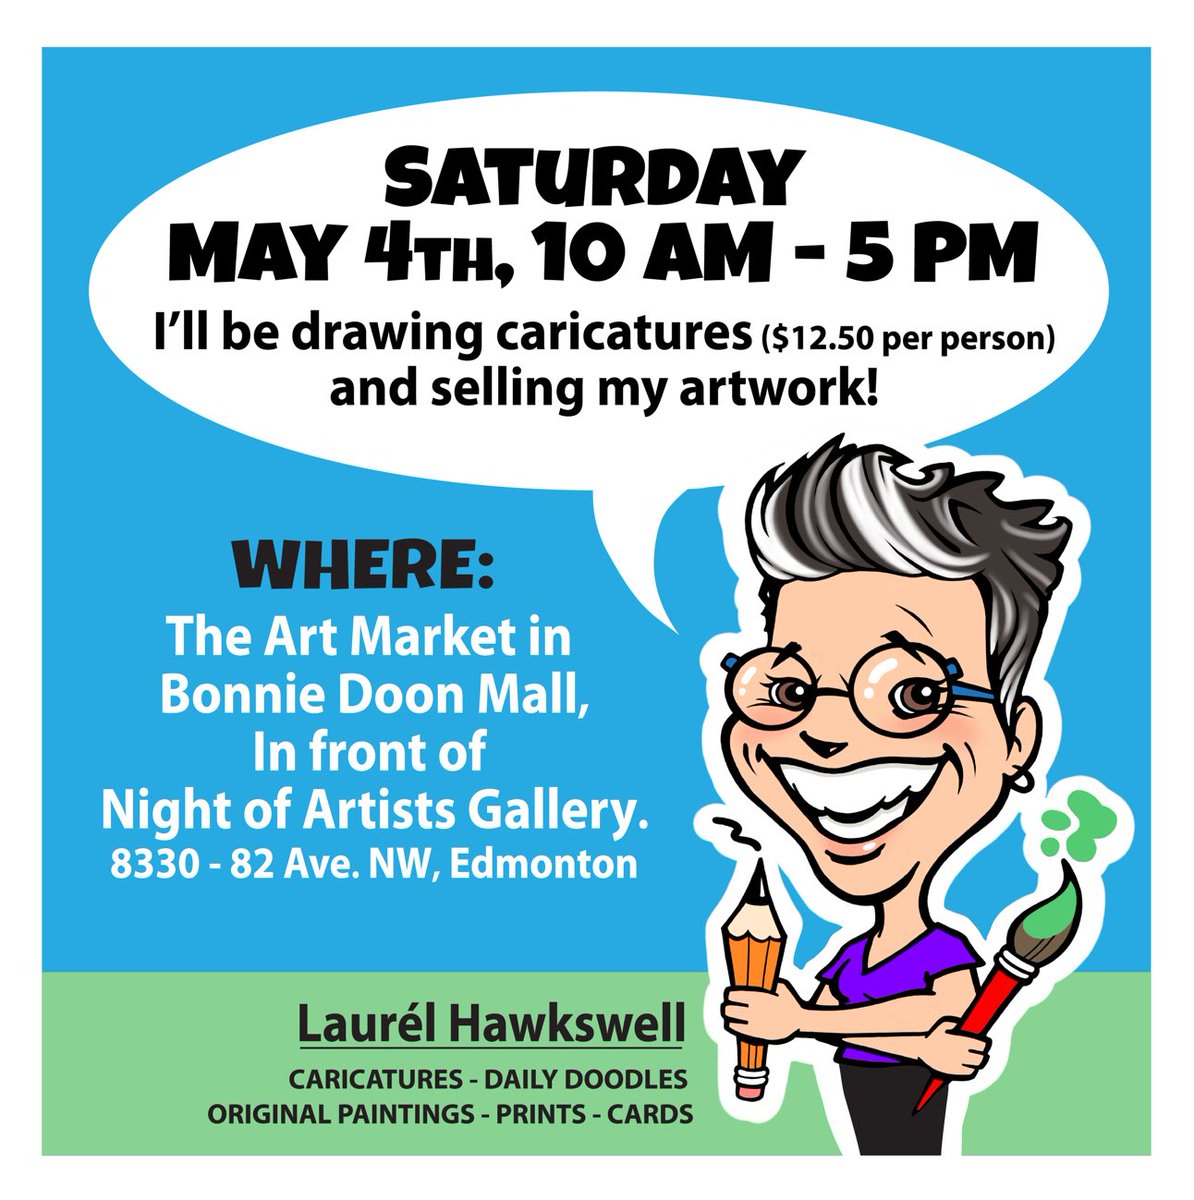 You’re invited to come out to the Art Market and Night of Artists Gallery in Bonnie Doon Mall this Saturday. See you there! #Yeg #YegEvents #YegArtists #artists #Caricature #cartoons #paintings #cards #prints #ShopLocal